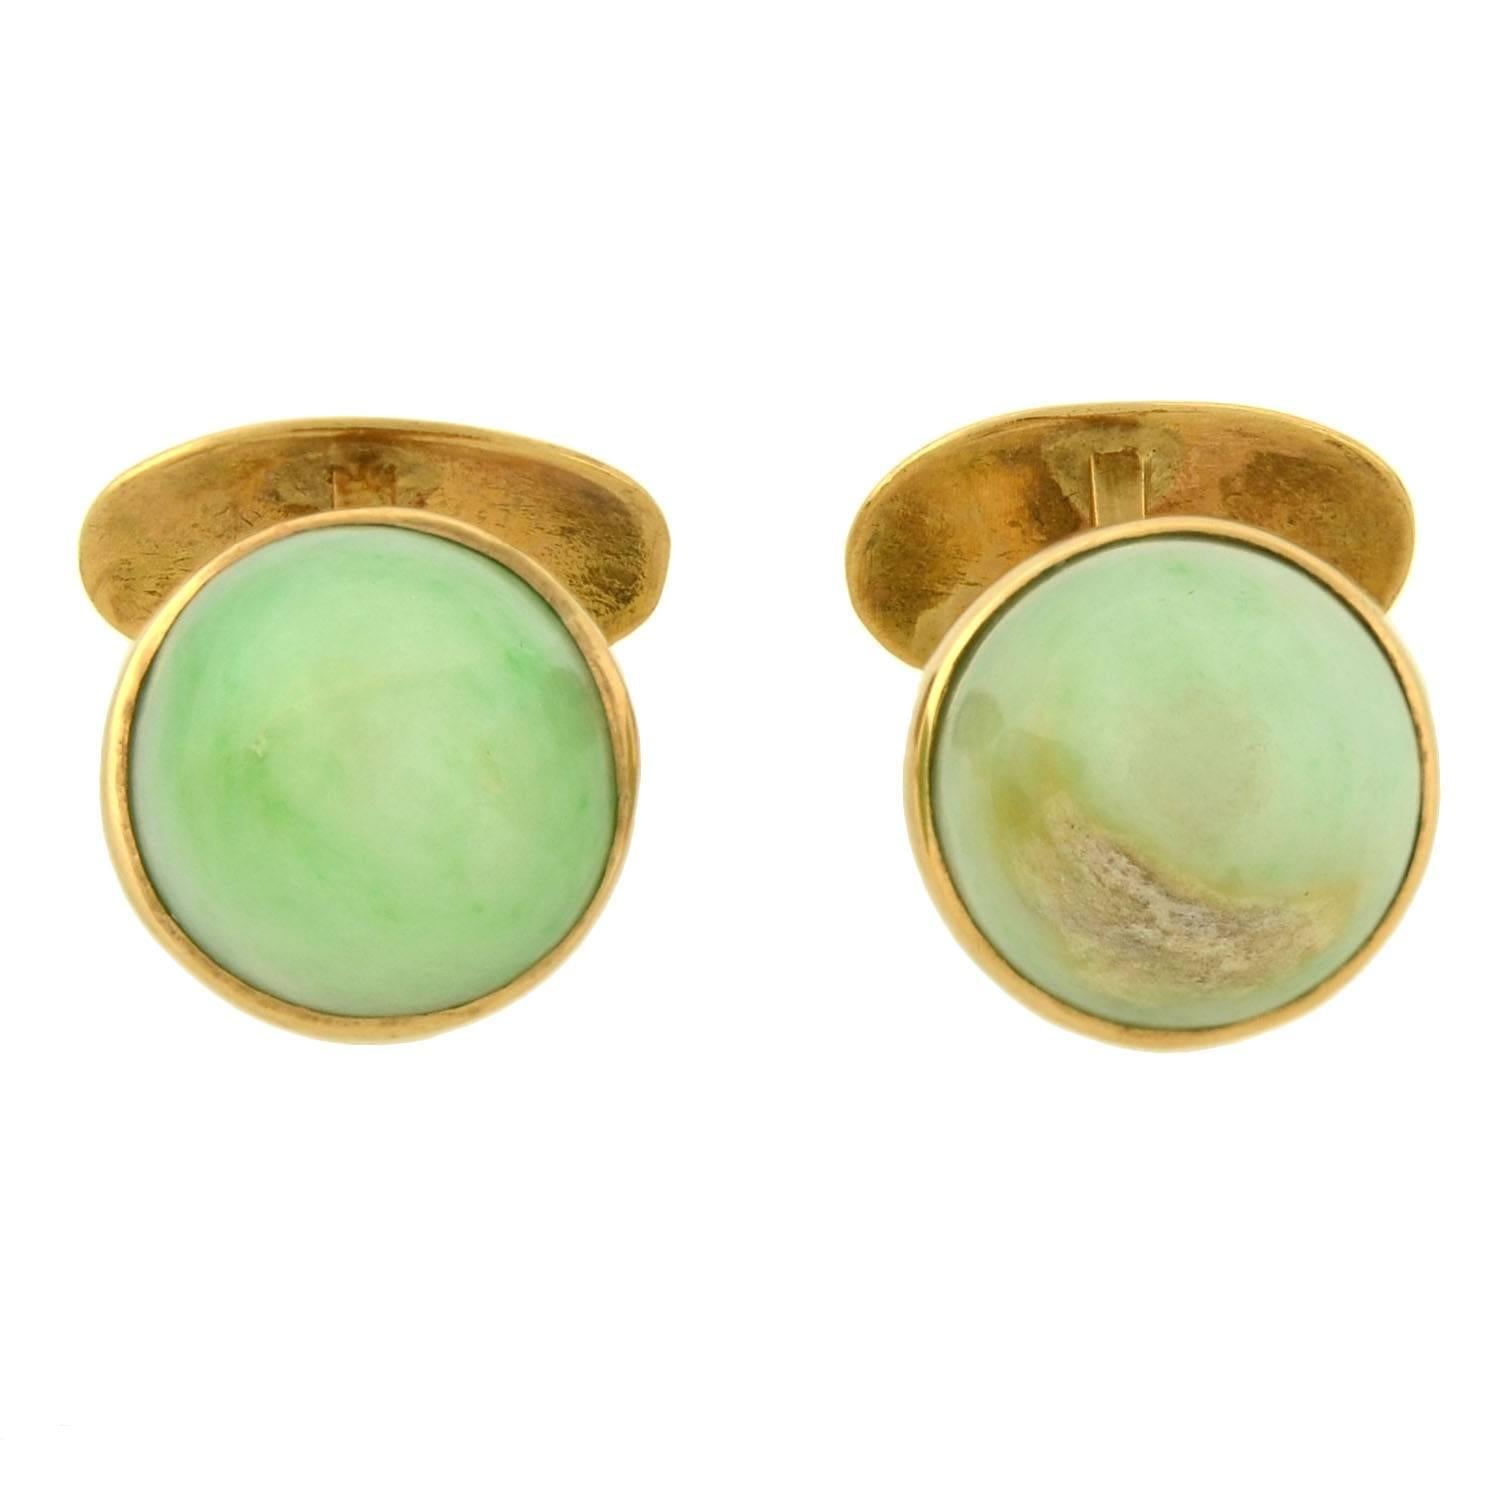 A wonderful pair of jade cufflinks from the Art Deco (ca1920s) era! Each cufflink is crafted in 14kt gold, and has a simple, yet stylish design. The jade cabochons are bezel set, and polished into a smooth, conical shape.They exhibit a soft, milky